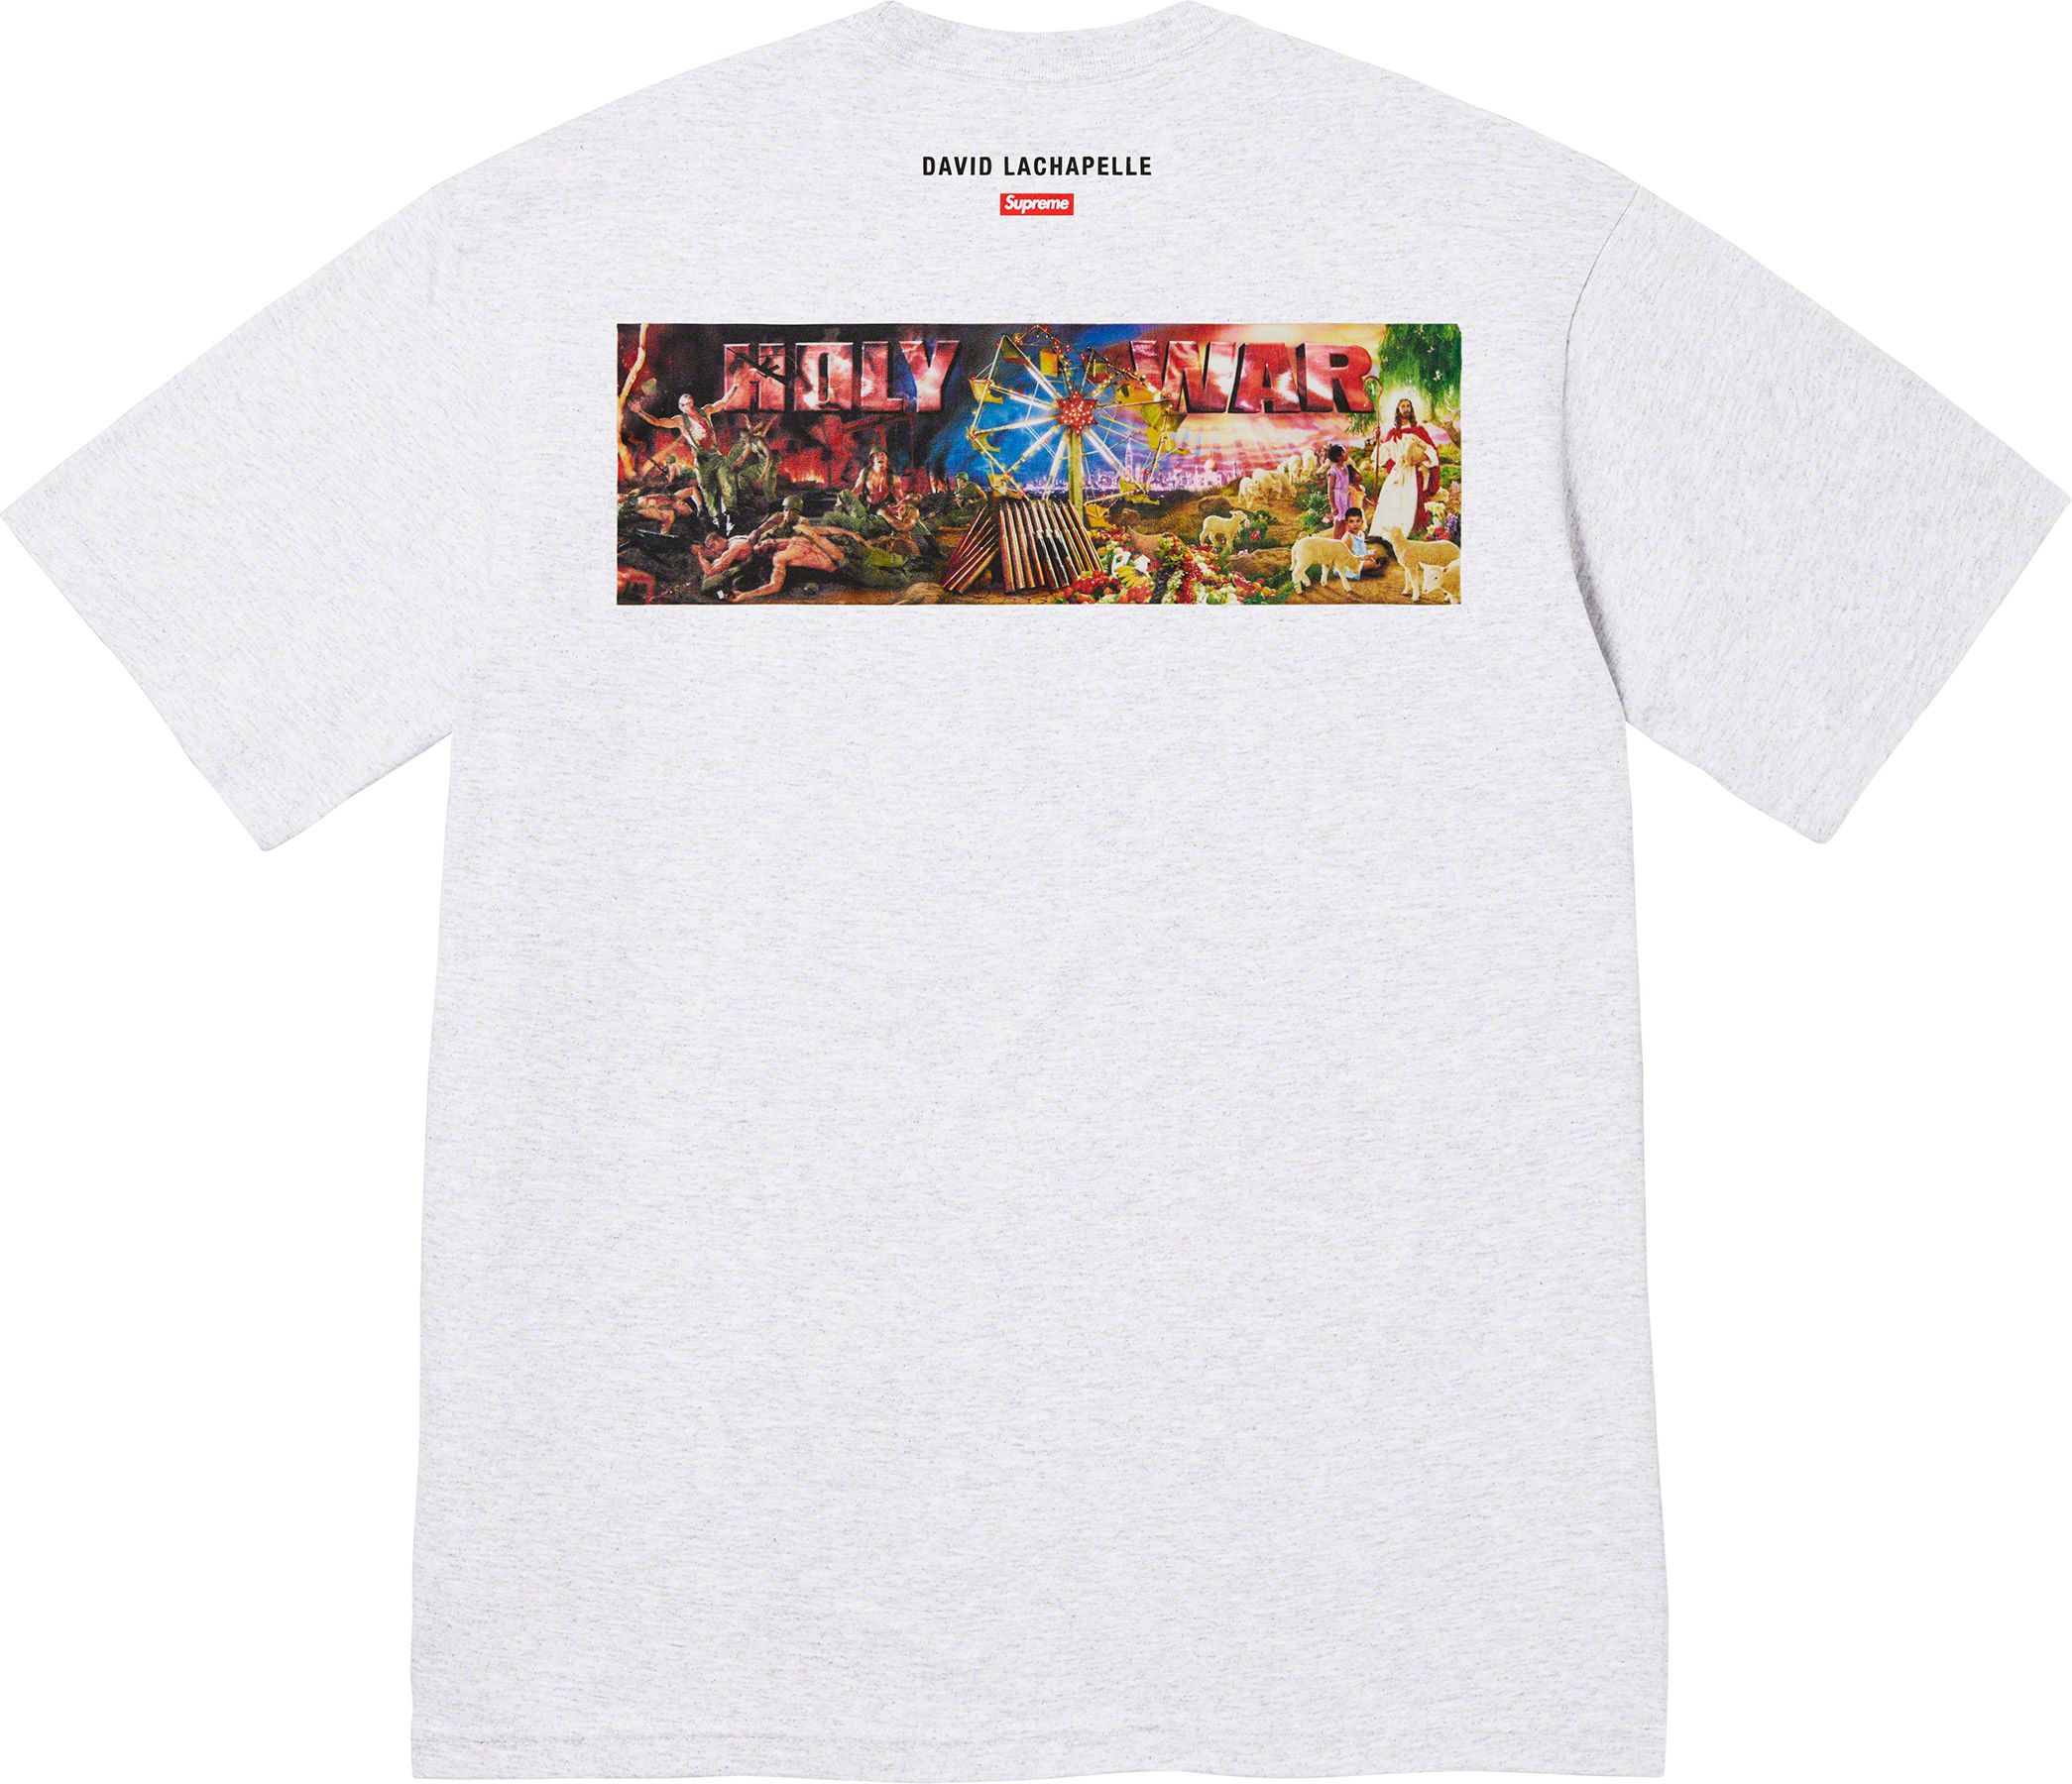 Warm Up Tee - Fall/Winter 2023 Preview – Supreme